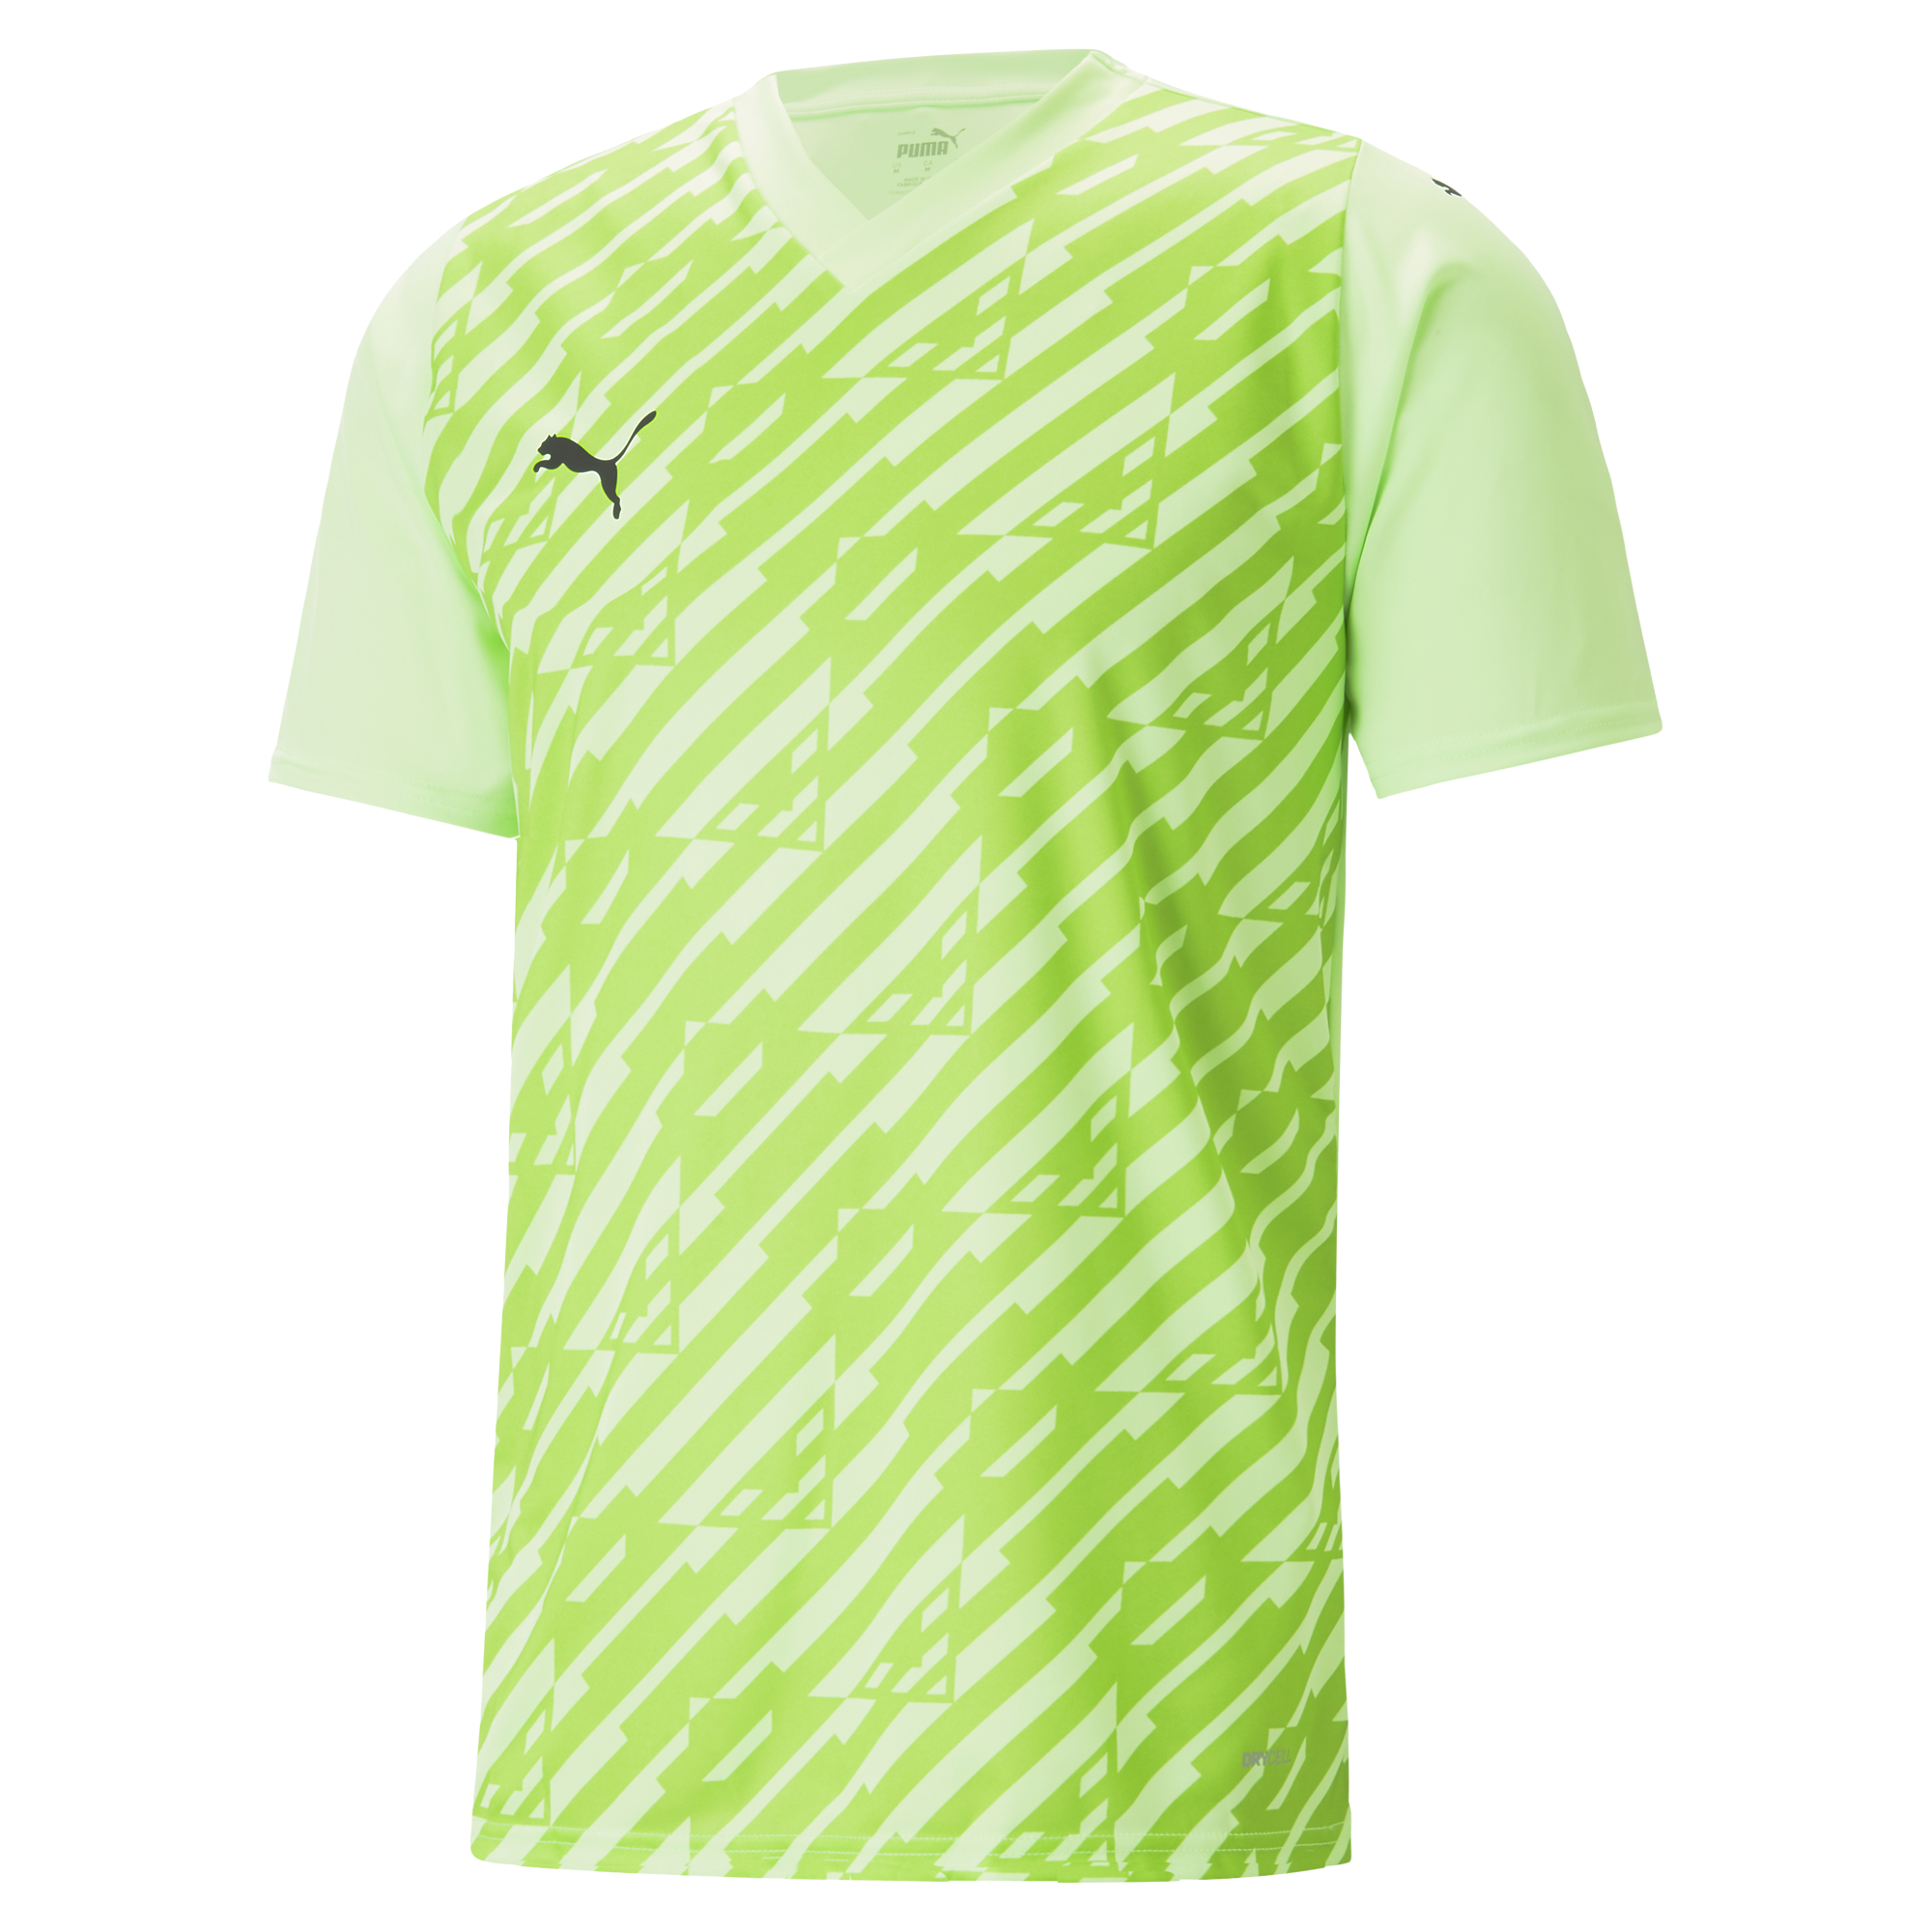 Puma teamUltimate Jersey - Fizzy Lime